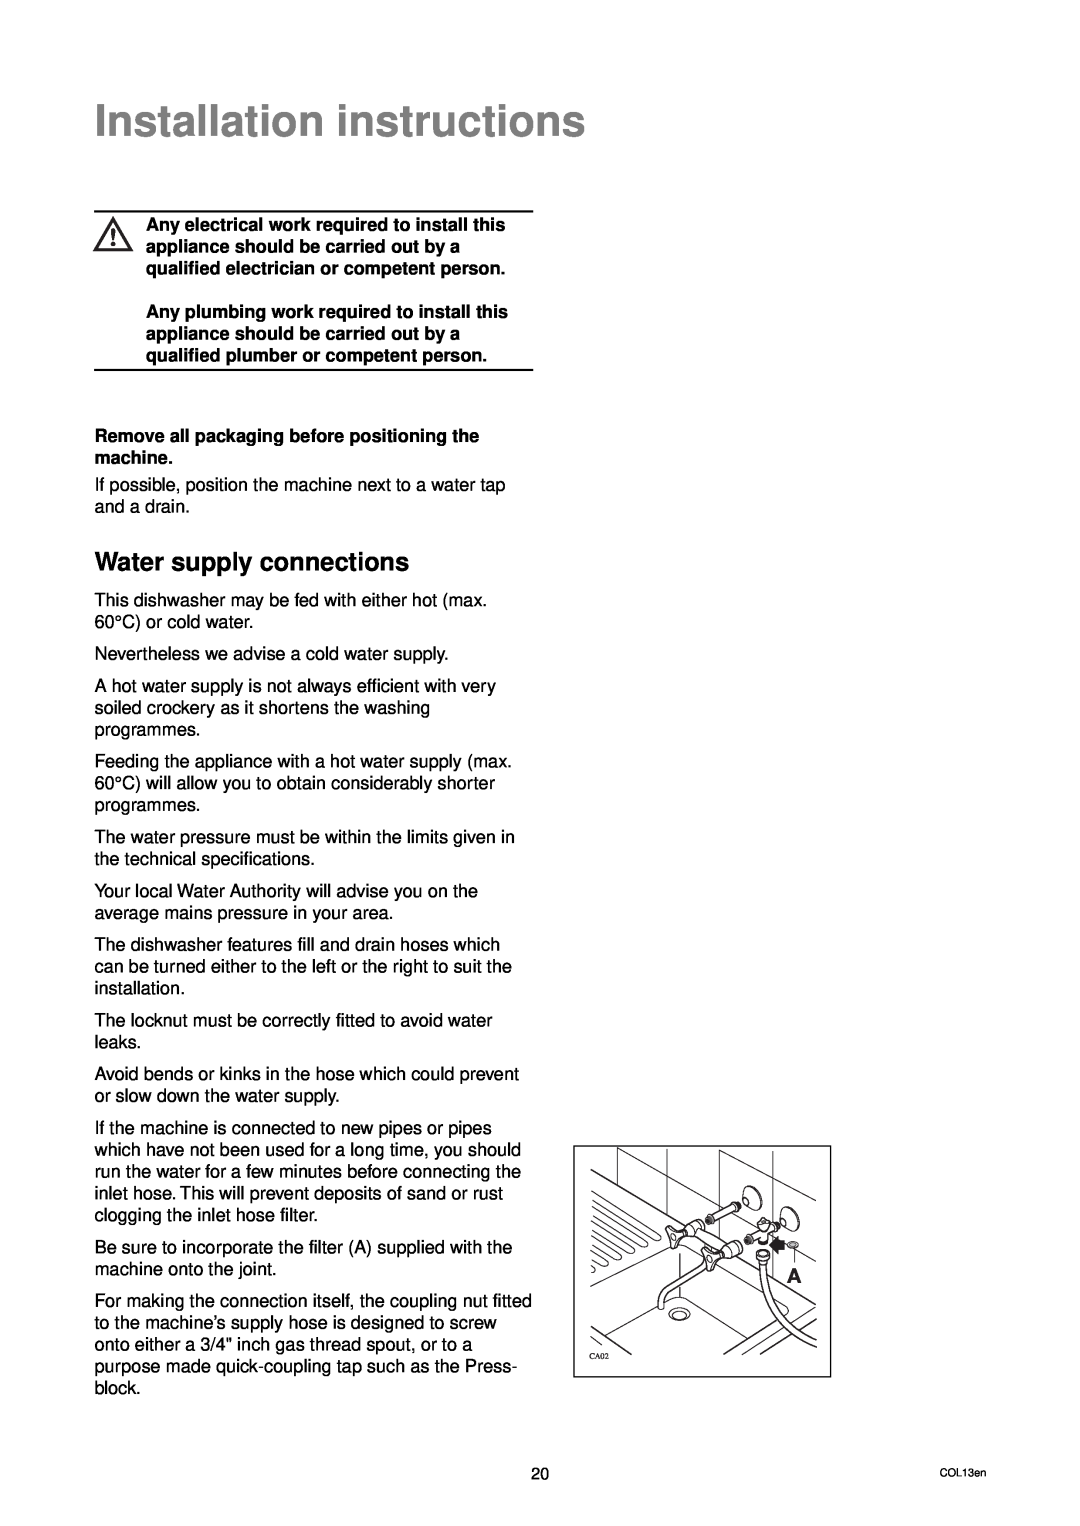 Electrolux DW 80 manual Installation instructions, Water supply connections 